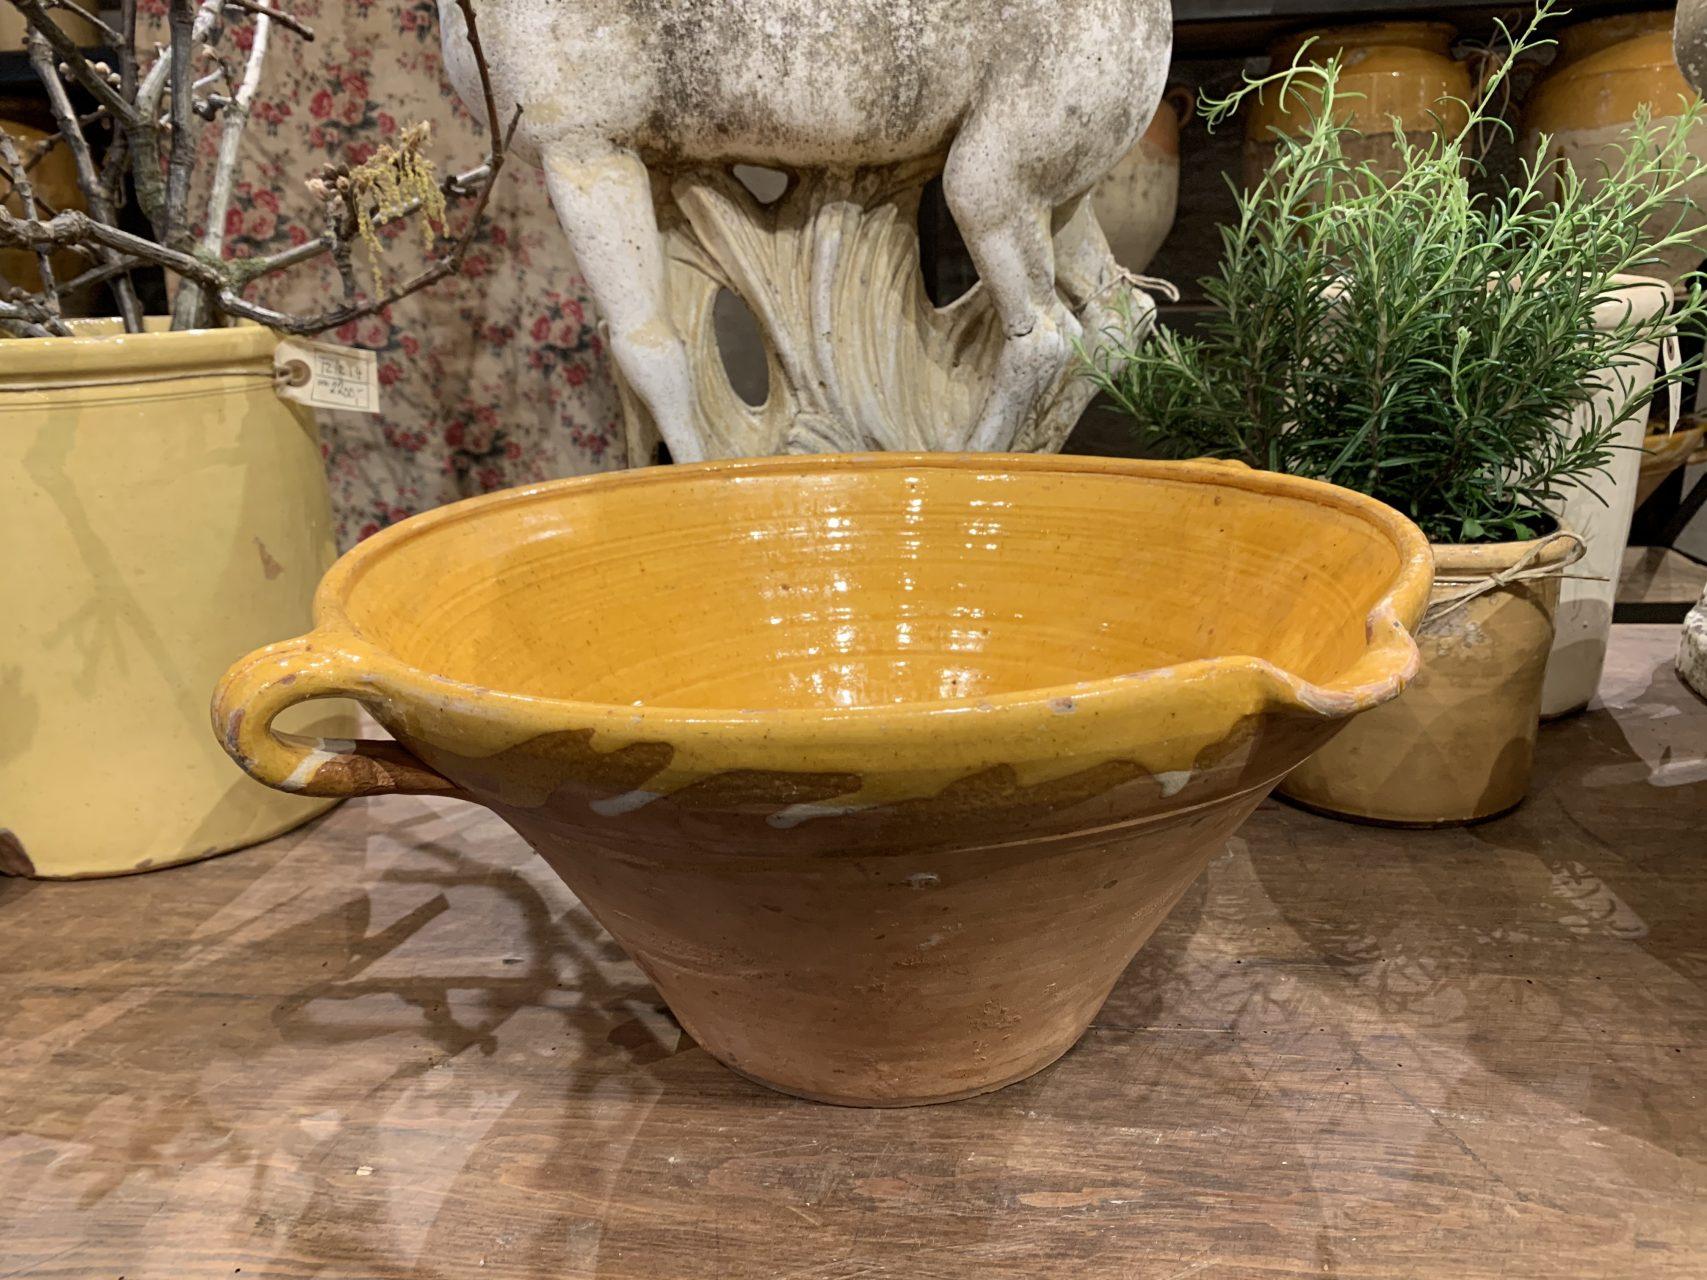 Wonderful and rustic, yet quality vintage French clay dish, known as a “Tian”. Used in food making and storage, is designed with handles, pouring spout, and a stunning characteristic beautiful curry yellow glazed inner and brim and raw clay